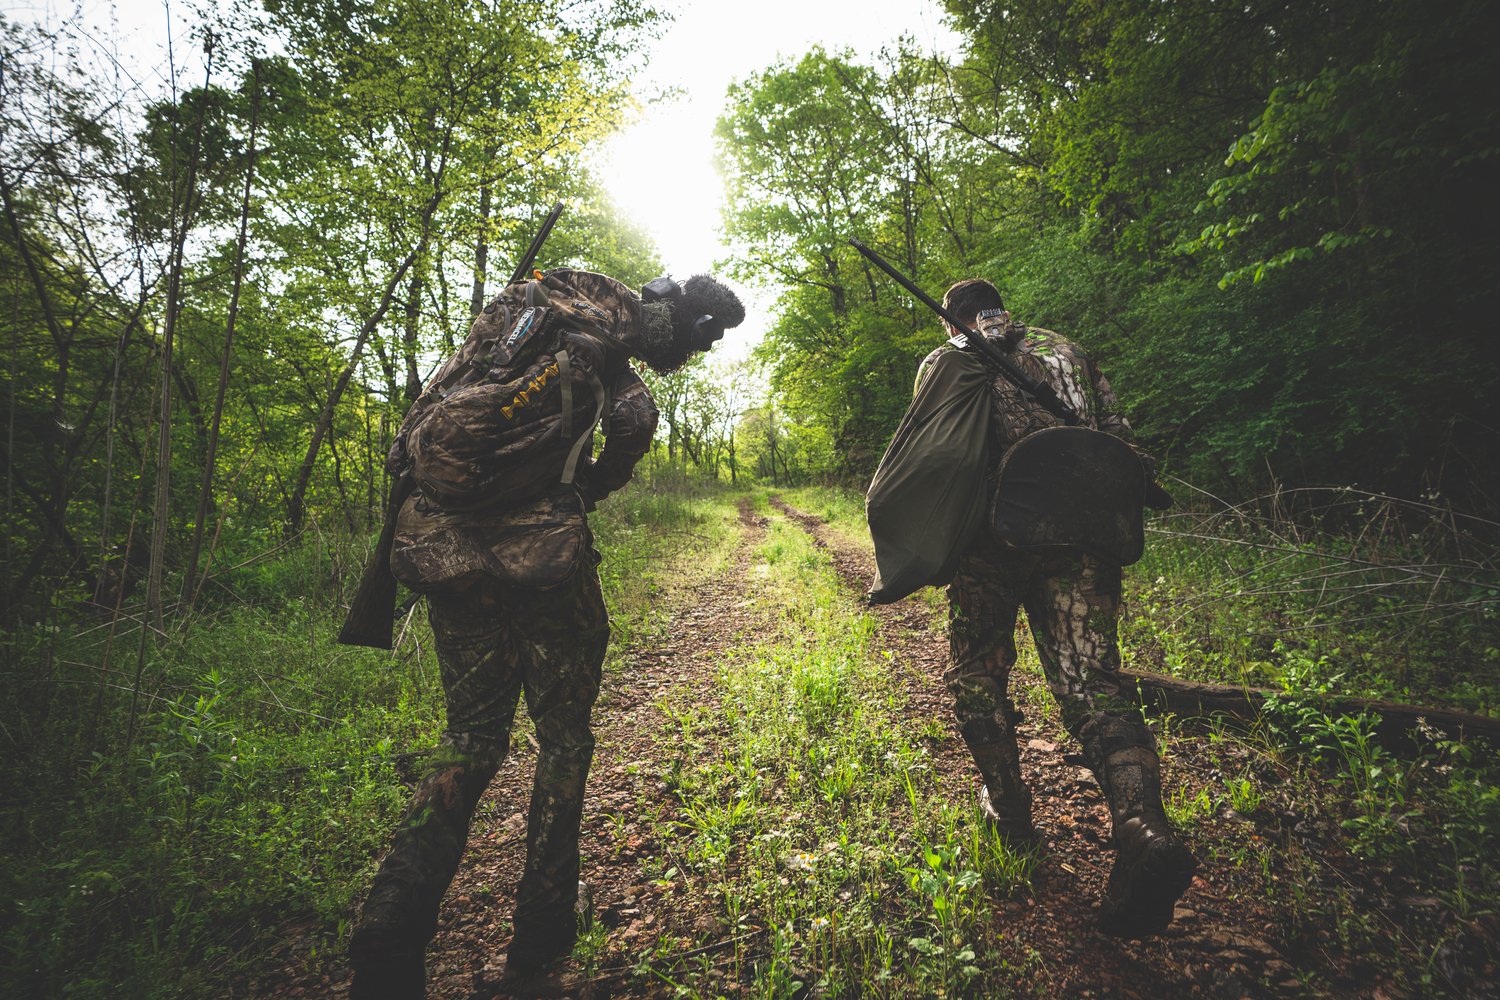 HUNTING TURKEYS AND SCOUTING FOR DEER?